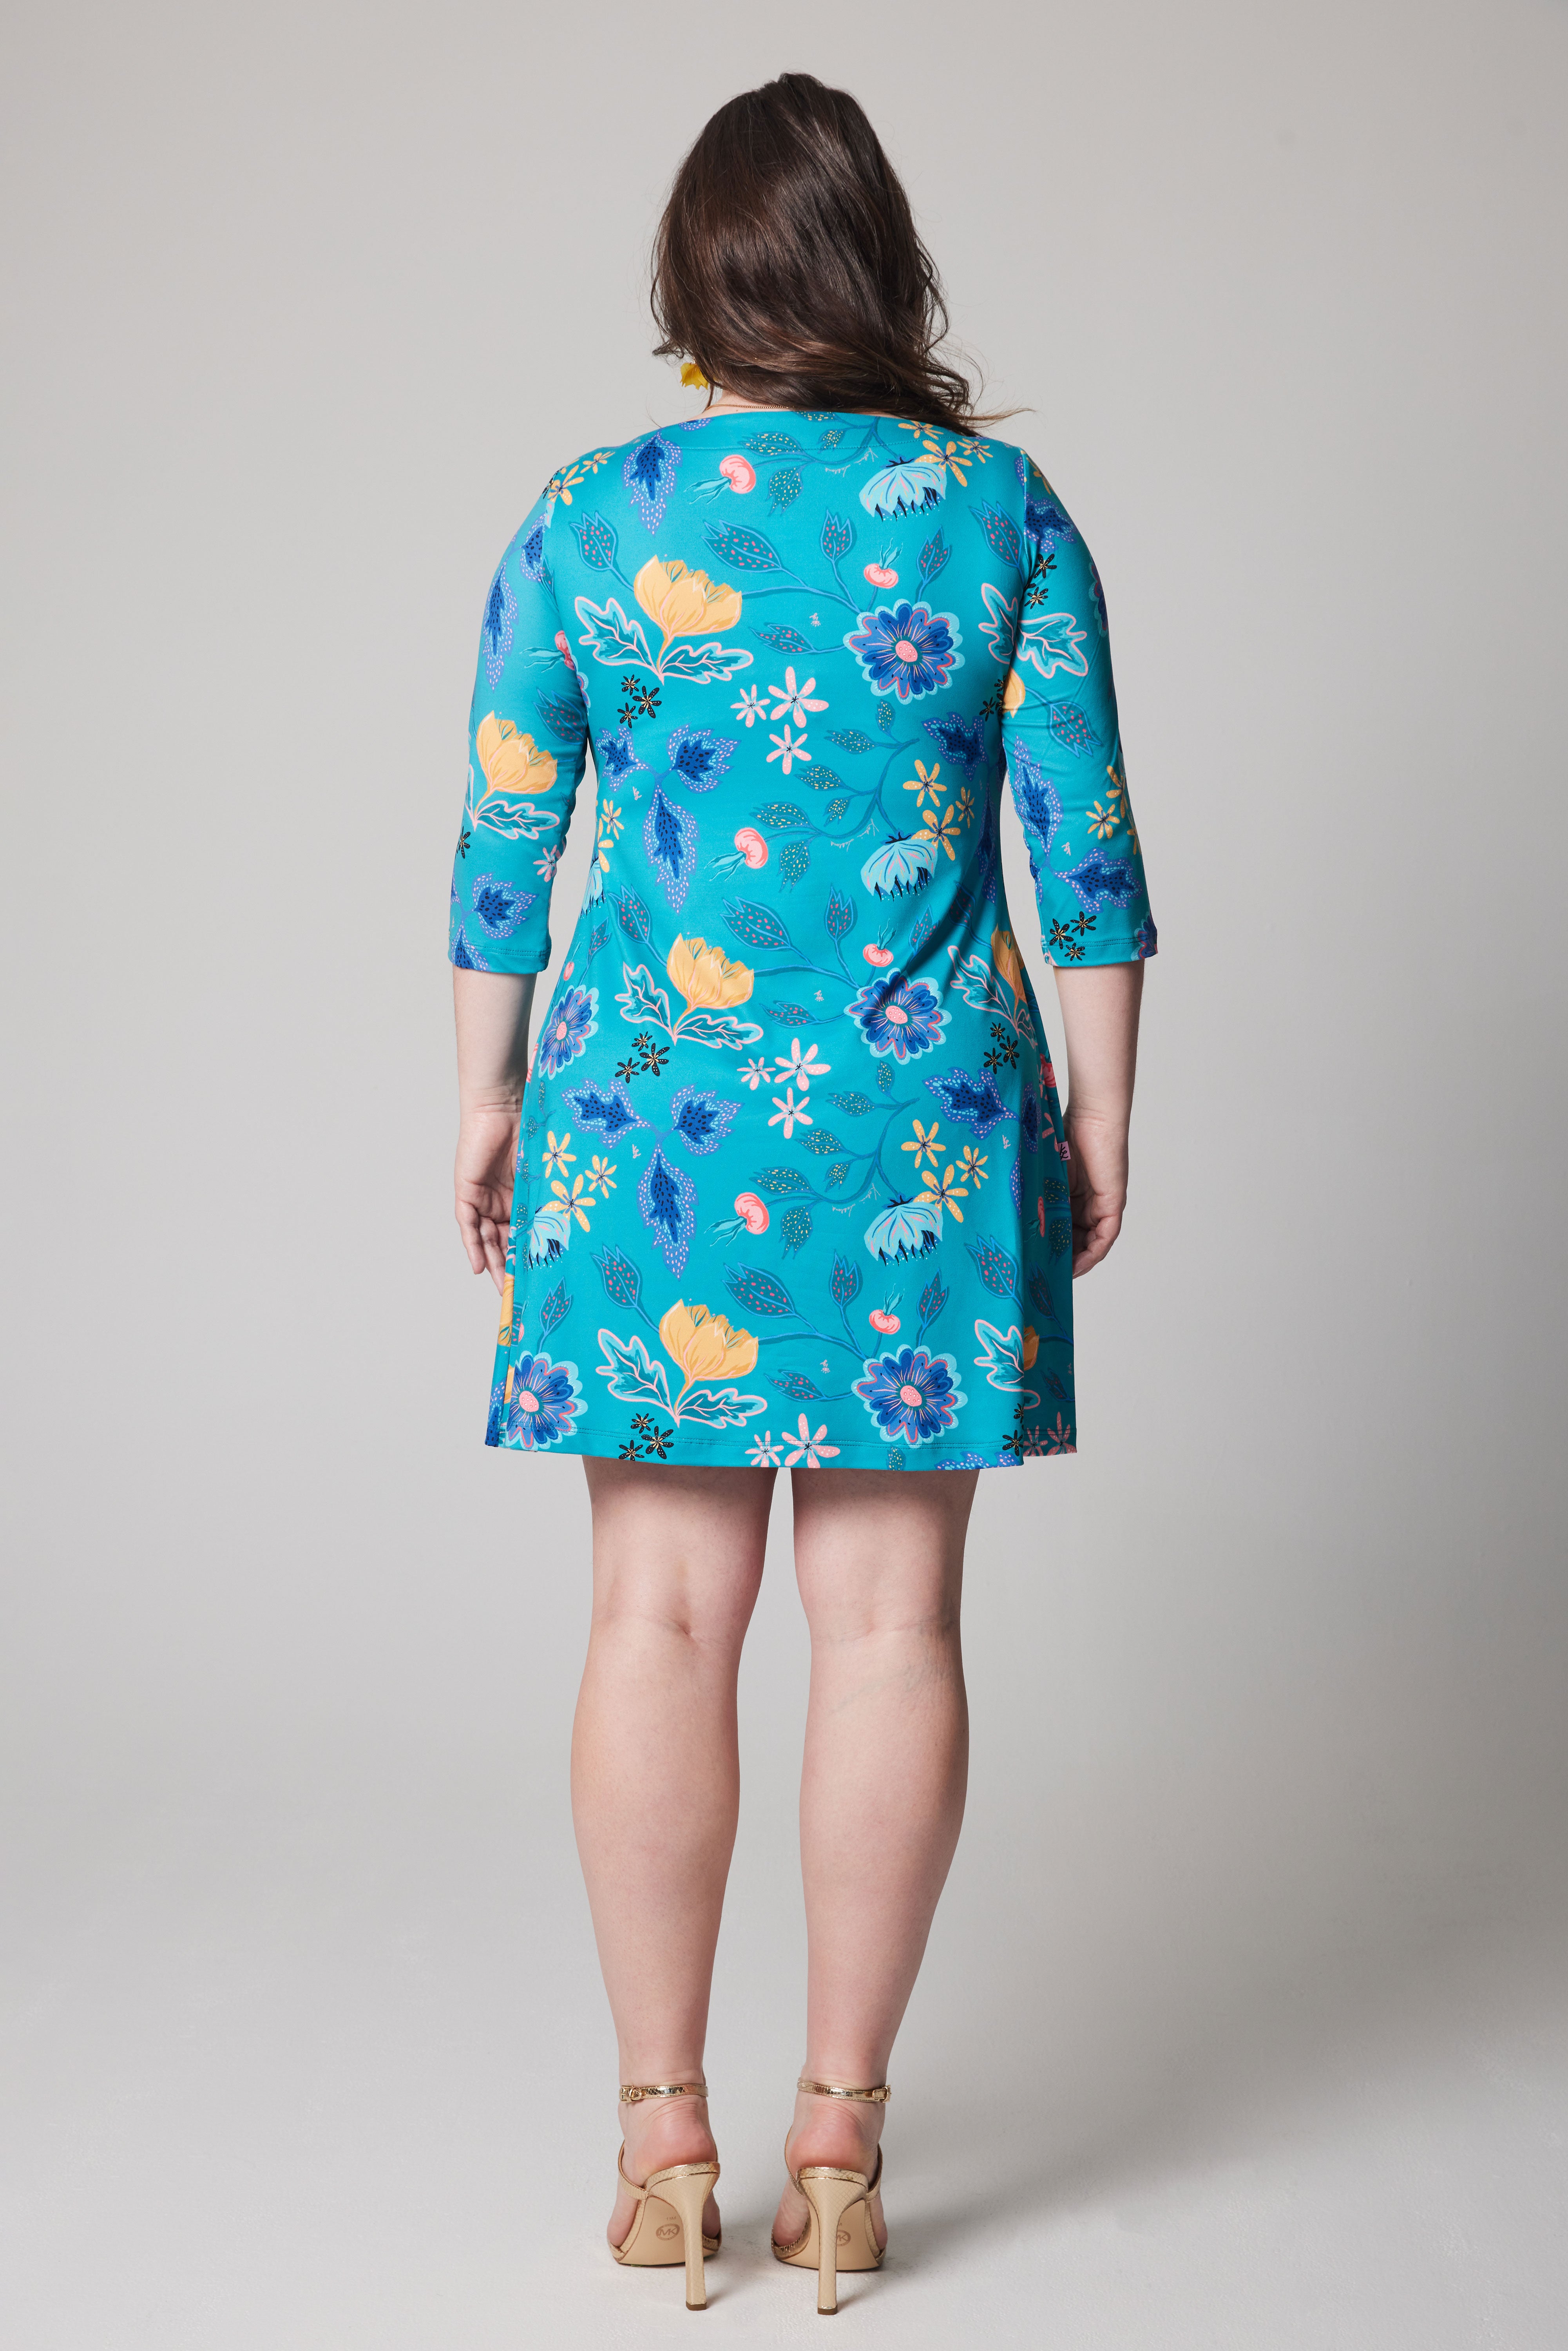 A-Line Dress - Rosehip Turquoise